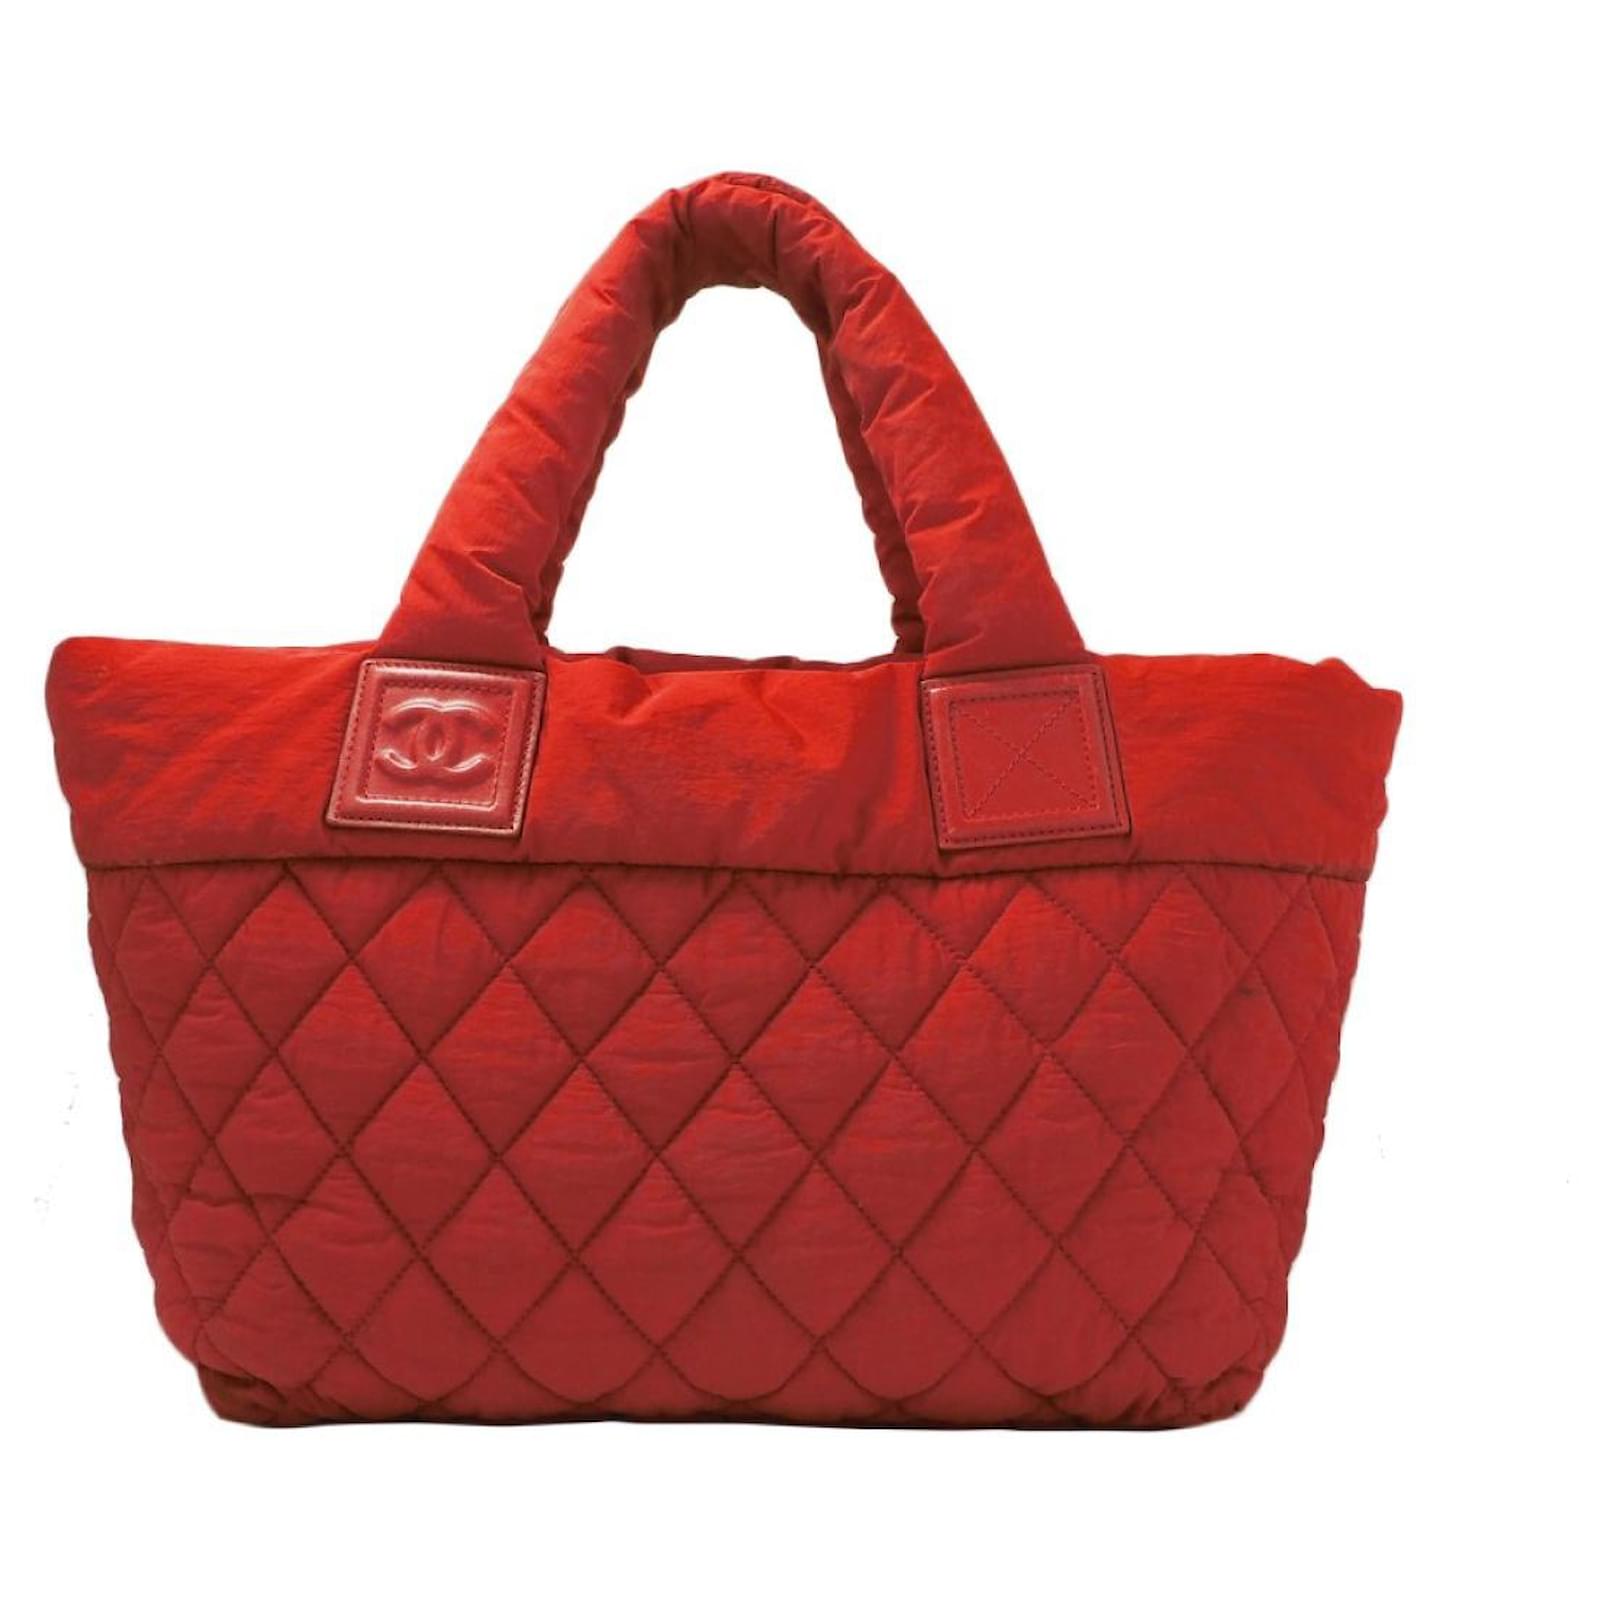 [Used] Chanel Coco Cocoon Tote PM Tote Bag Handbag Reversible Matrasse  Nylon Red Olive Green